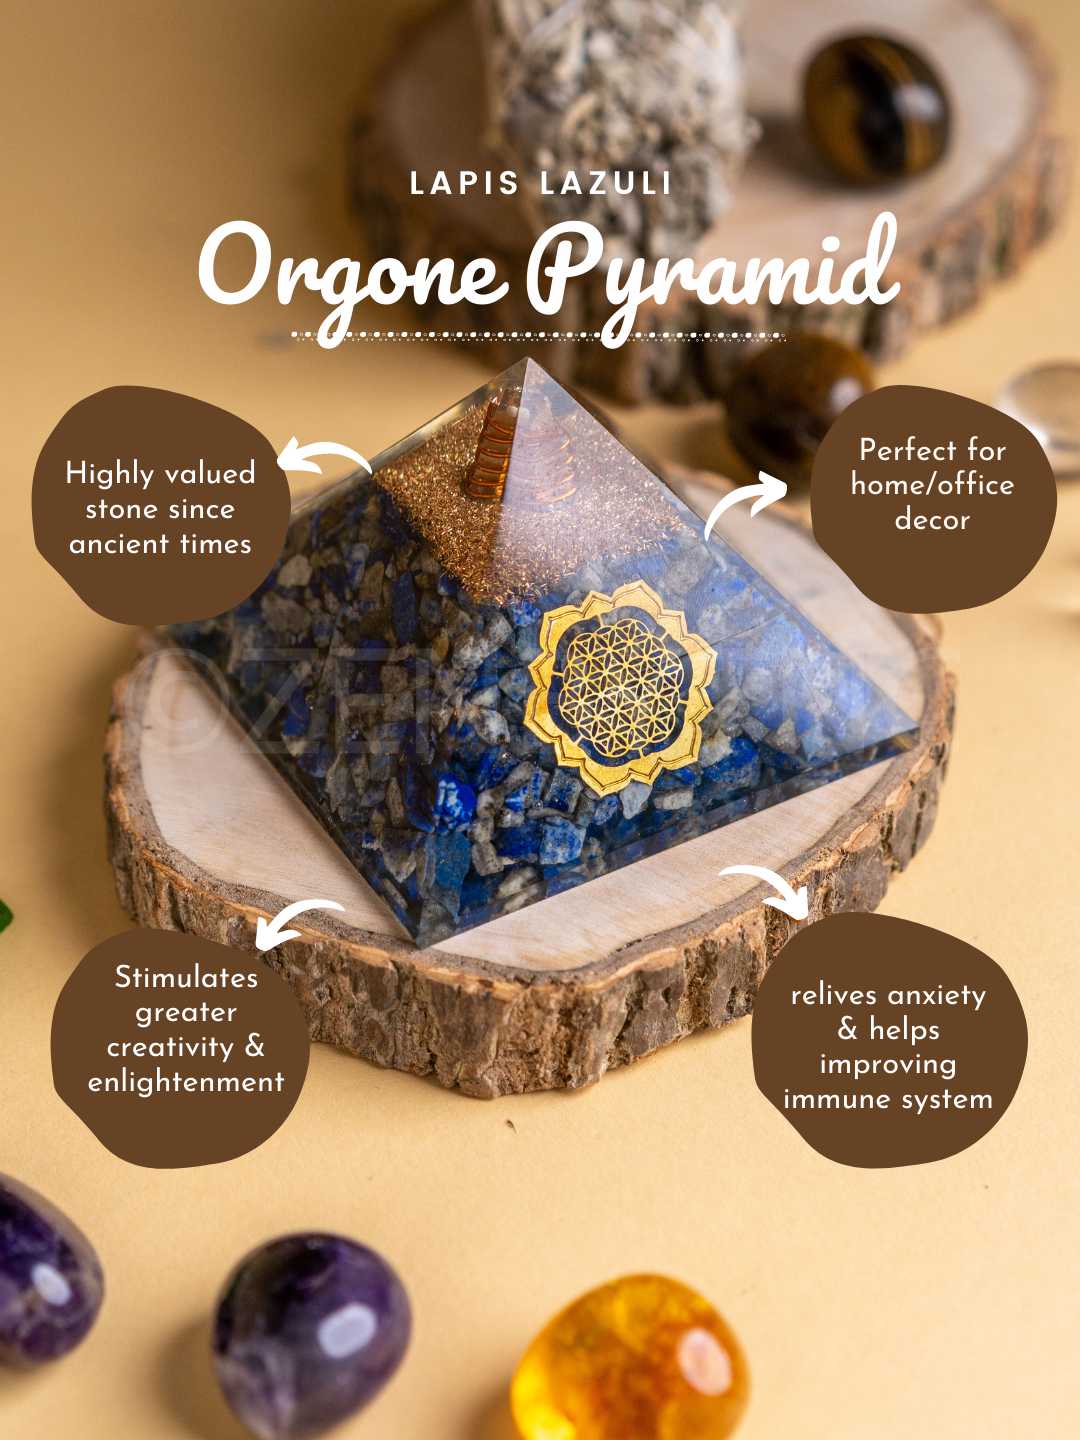 Zen Lapis Lazuli Orgonite Pyramid To Relieve Anxiety and Insomnia The Zen Crystals